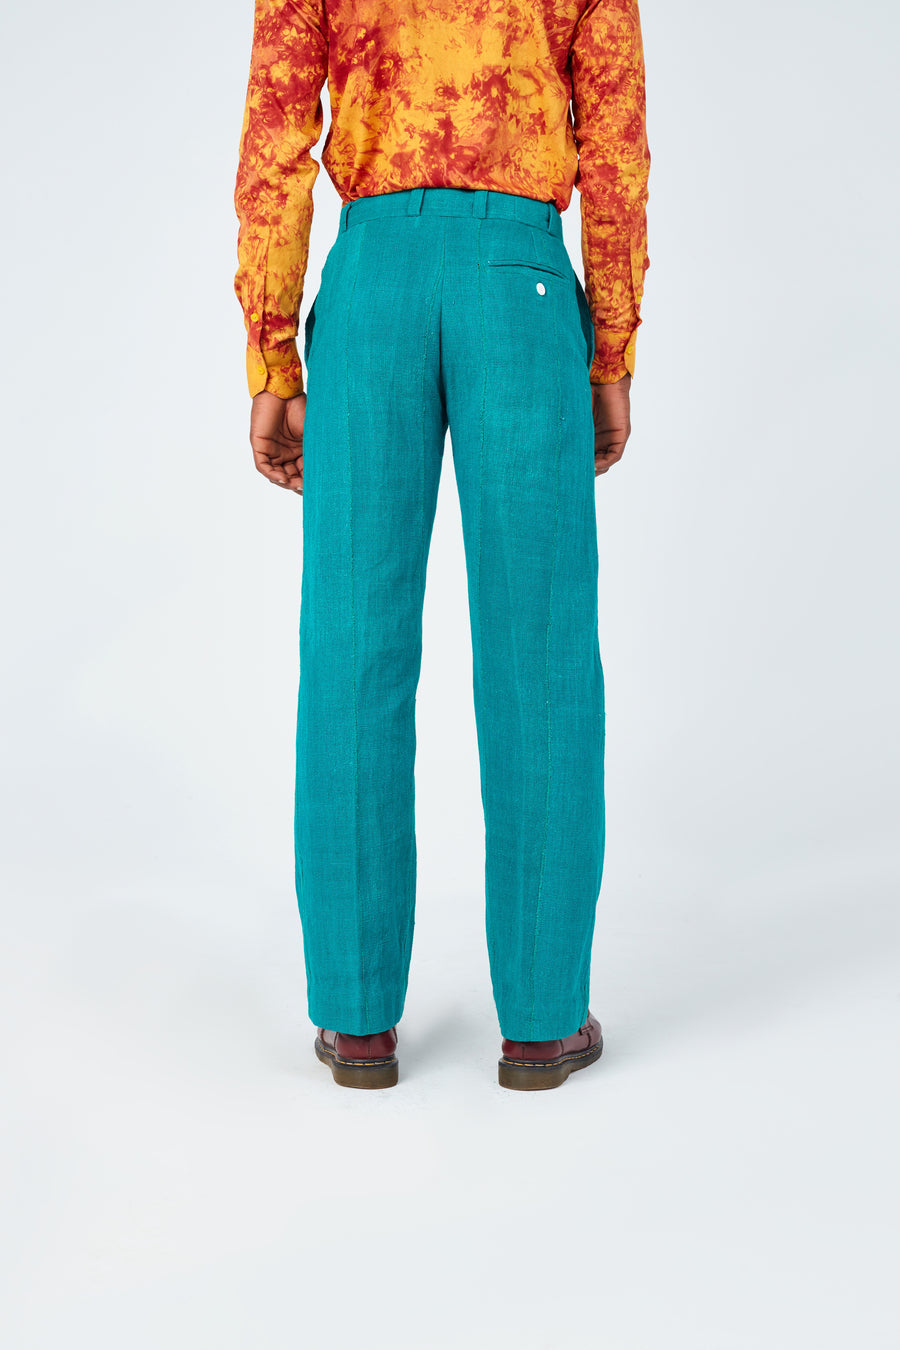 Fela III Tailor Fitted Straight Cut Pant -  Green